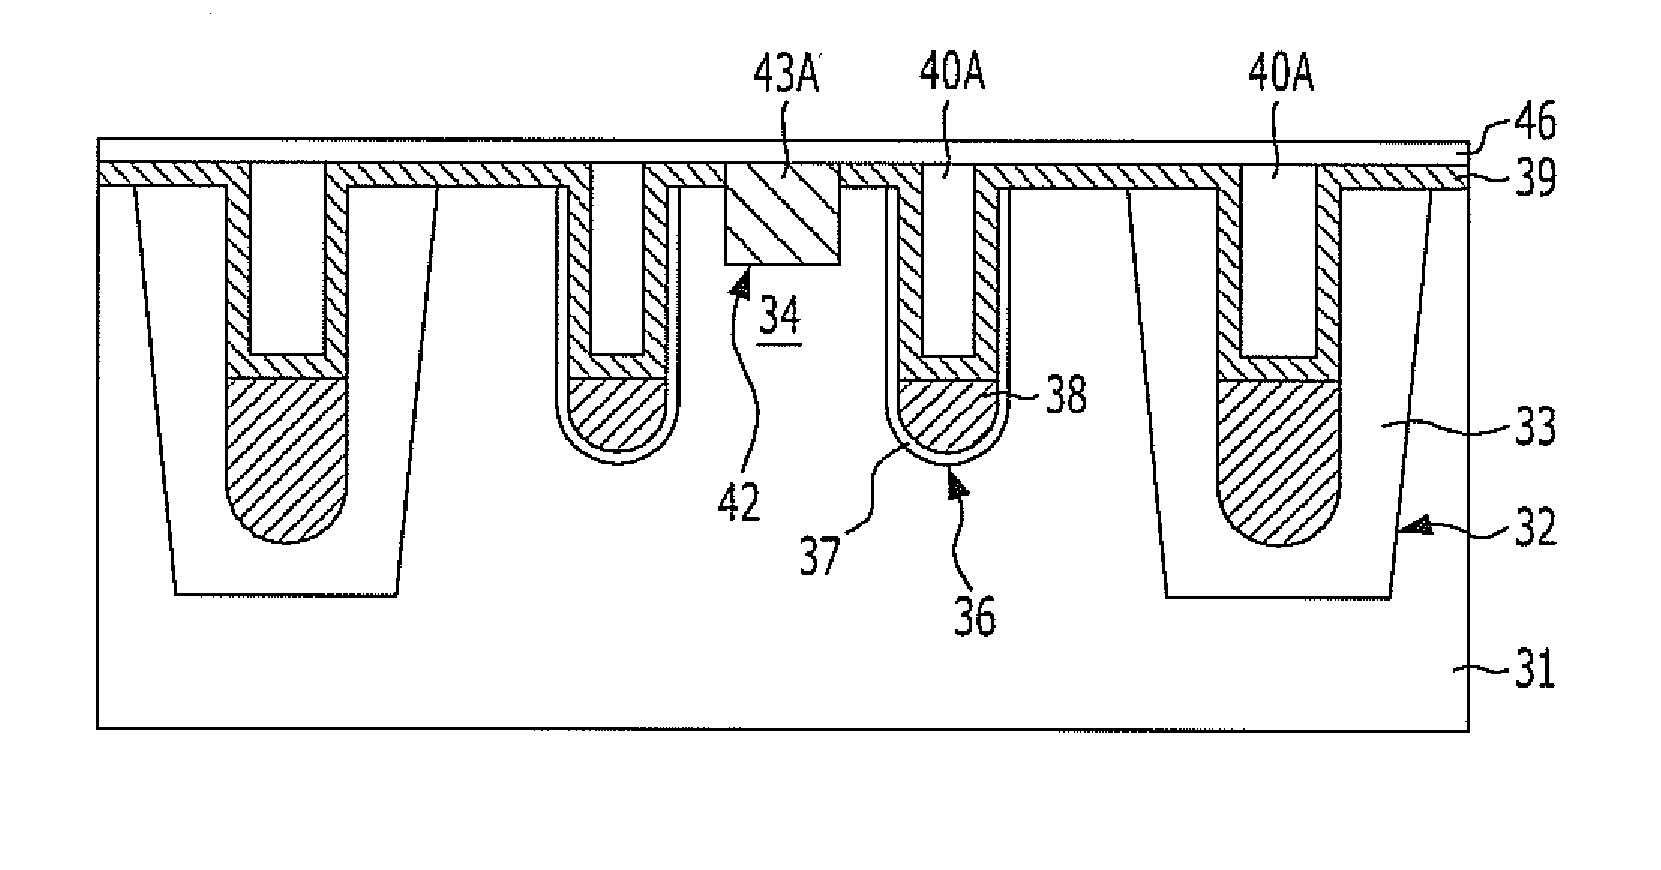 Semiconductor device with buried gates and buried bit lines and method for fabricating the same